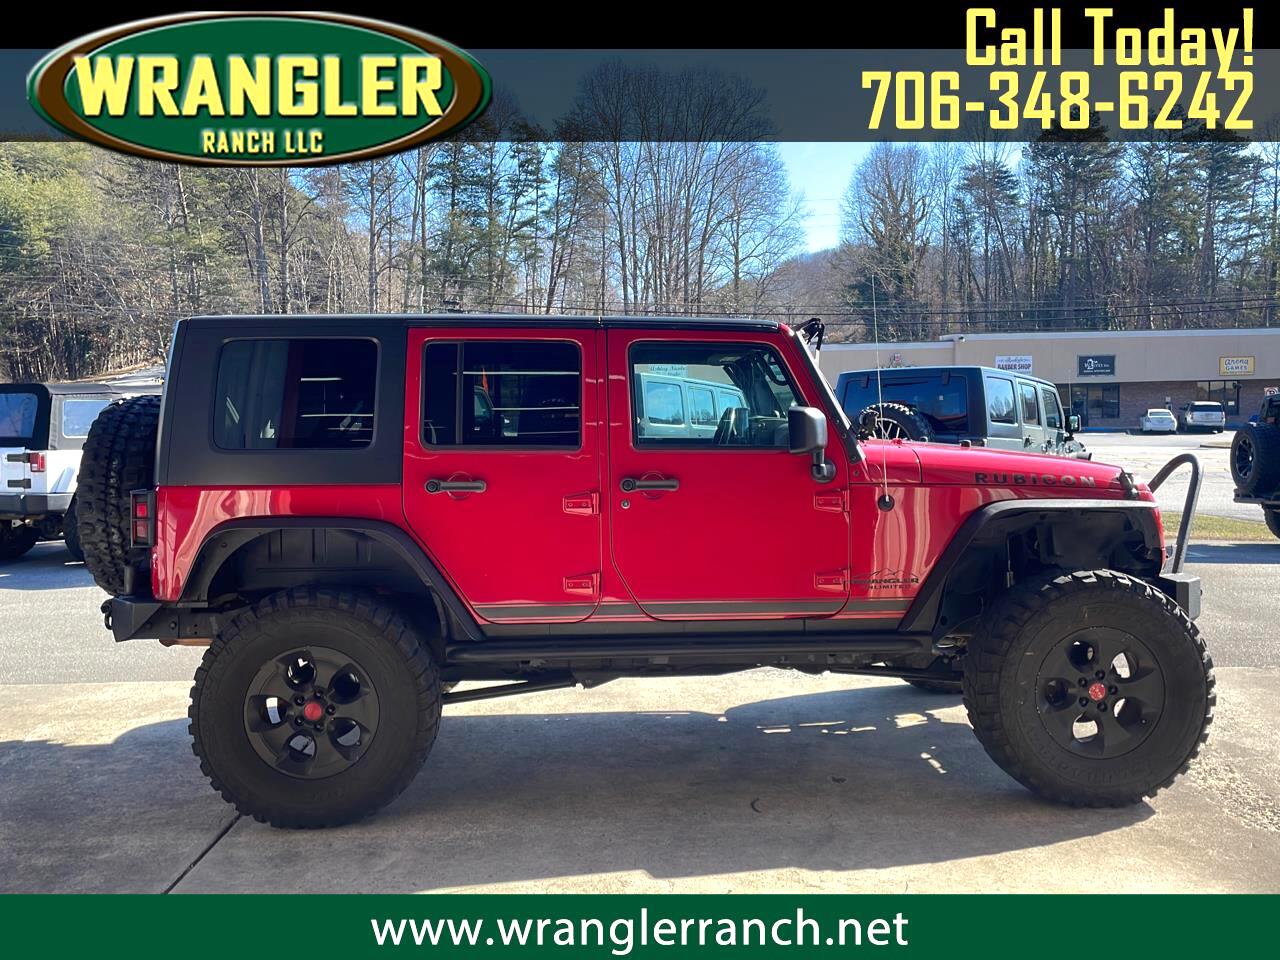 Used Cars for Sale Cleveland GA 30528 The Wrangler Ranch